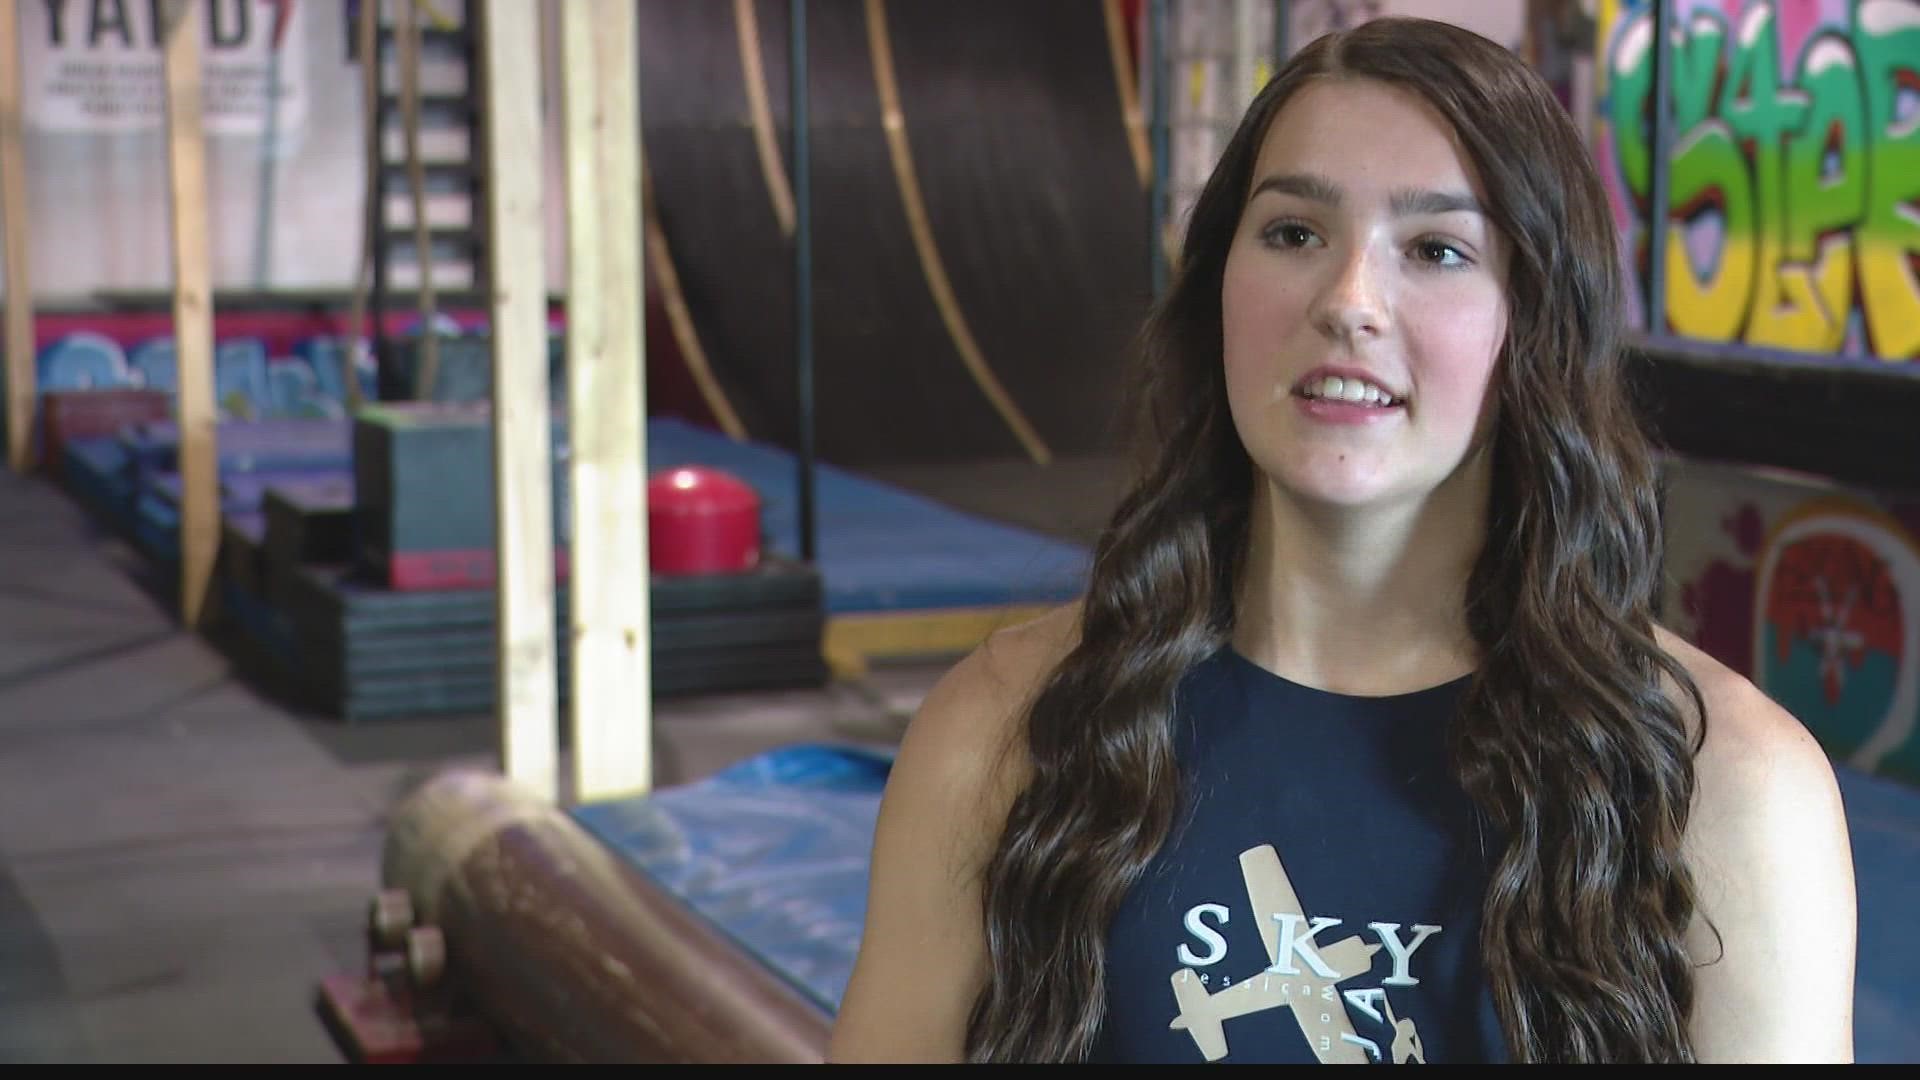 15-year-old Jess Wombles competed in the junior version of the show and moves up this season.